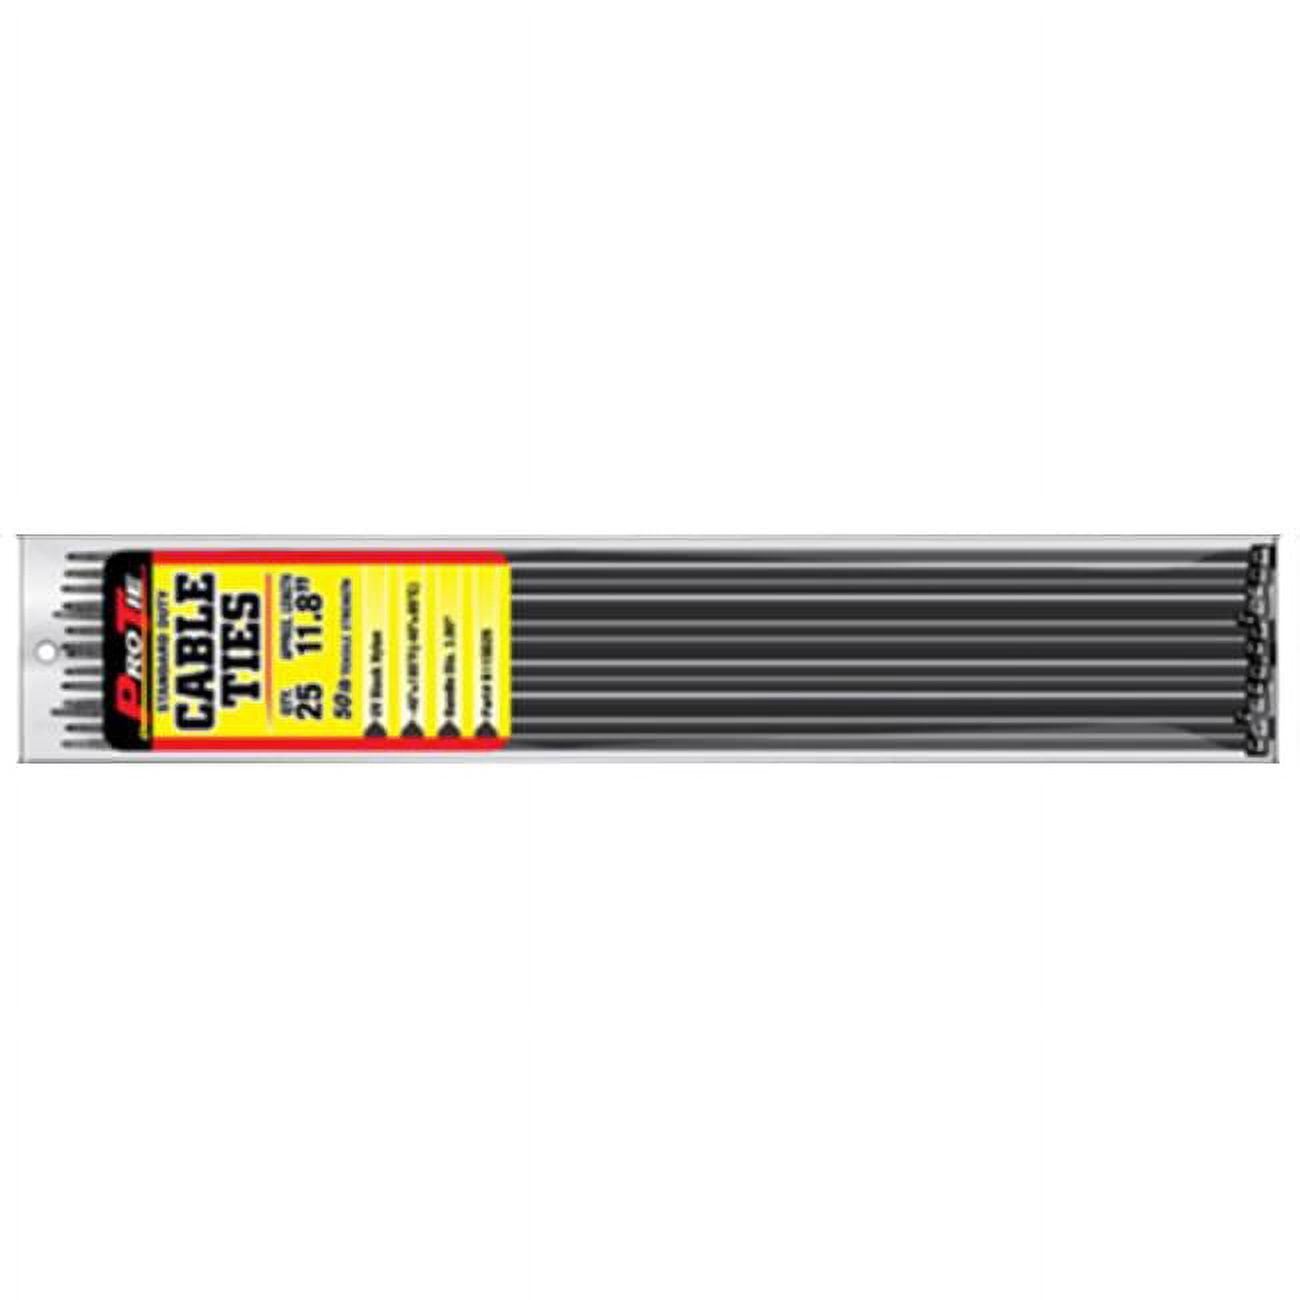 B8sd100 8 In. Standard Cable Ties, Uv Black - Pack Of 100